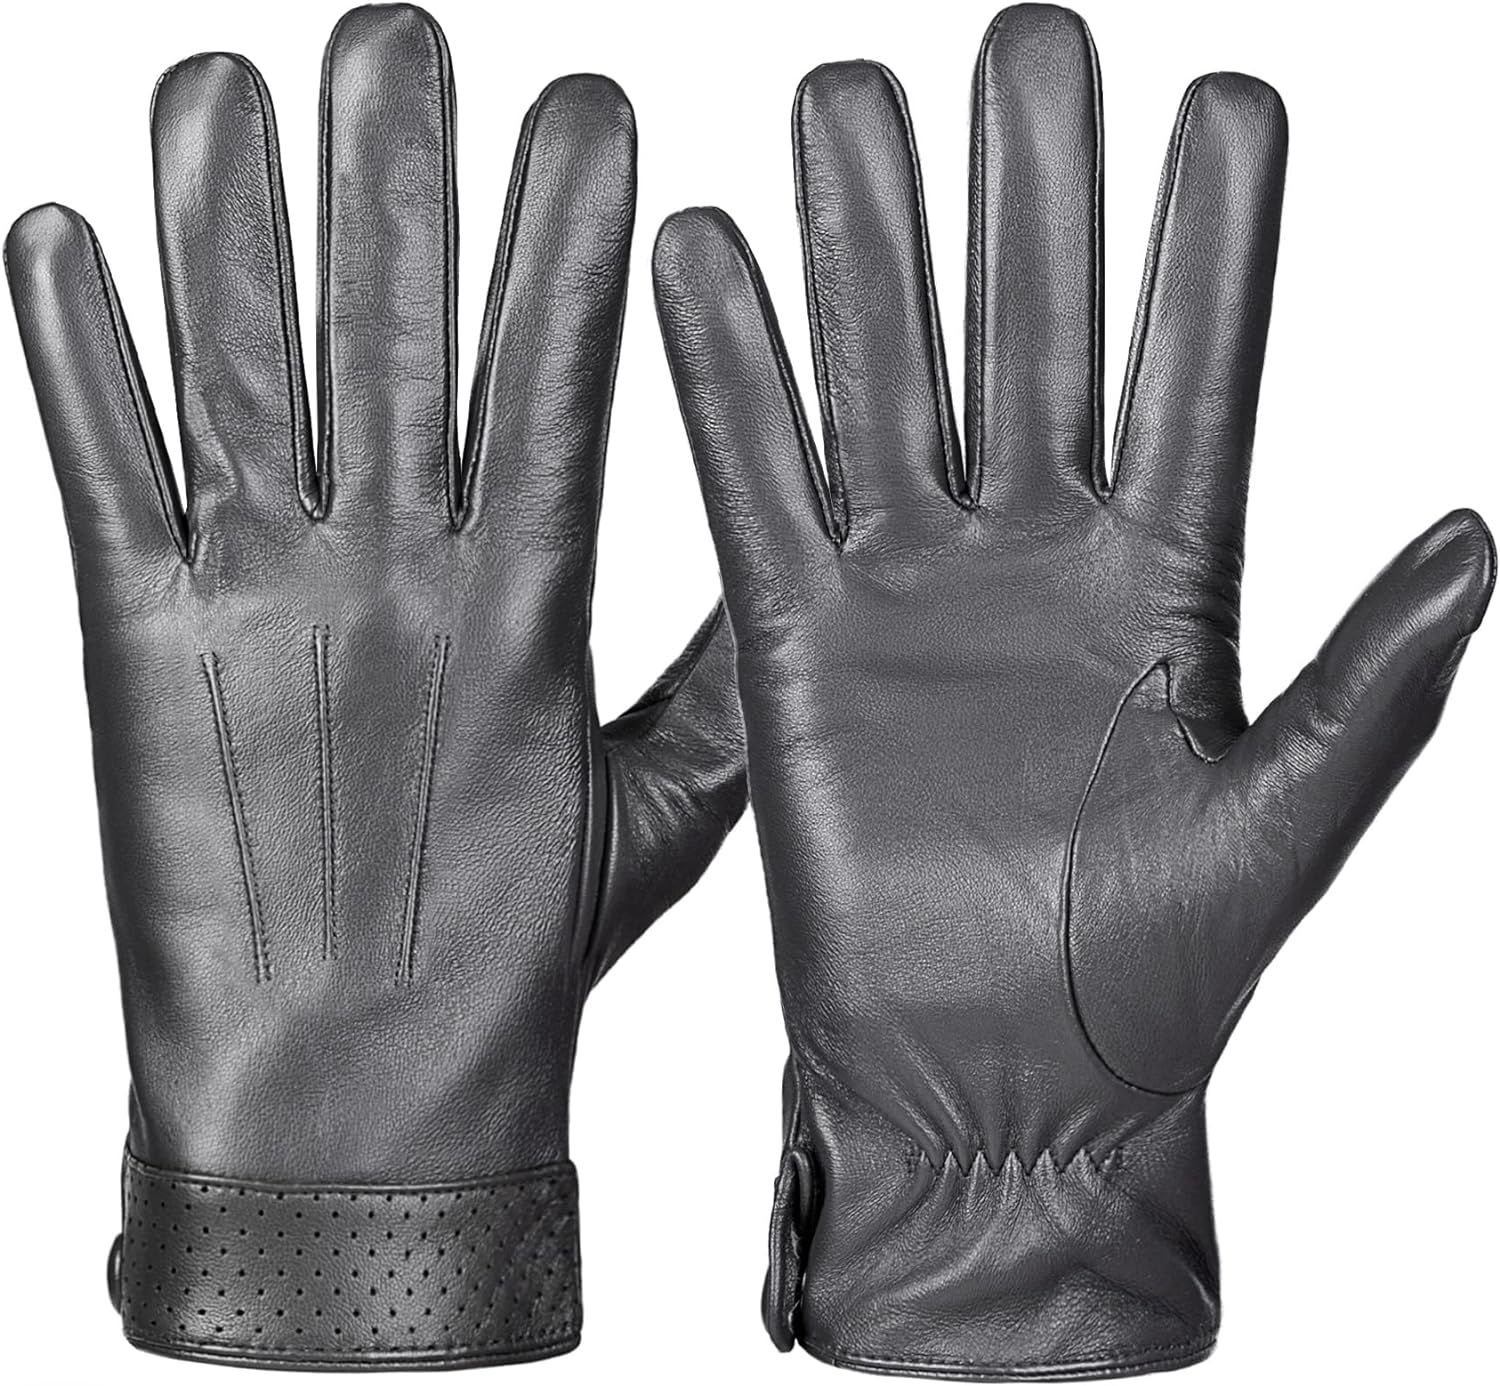 Whiteleopard Men's Winter Sheepskin Leather Gloves, Toasty Touchscreen Texting with Cashmere Lining, Ideal for Driving and Motorcycle Riding - image 1 of 7